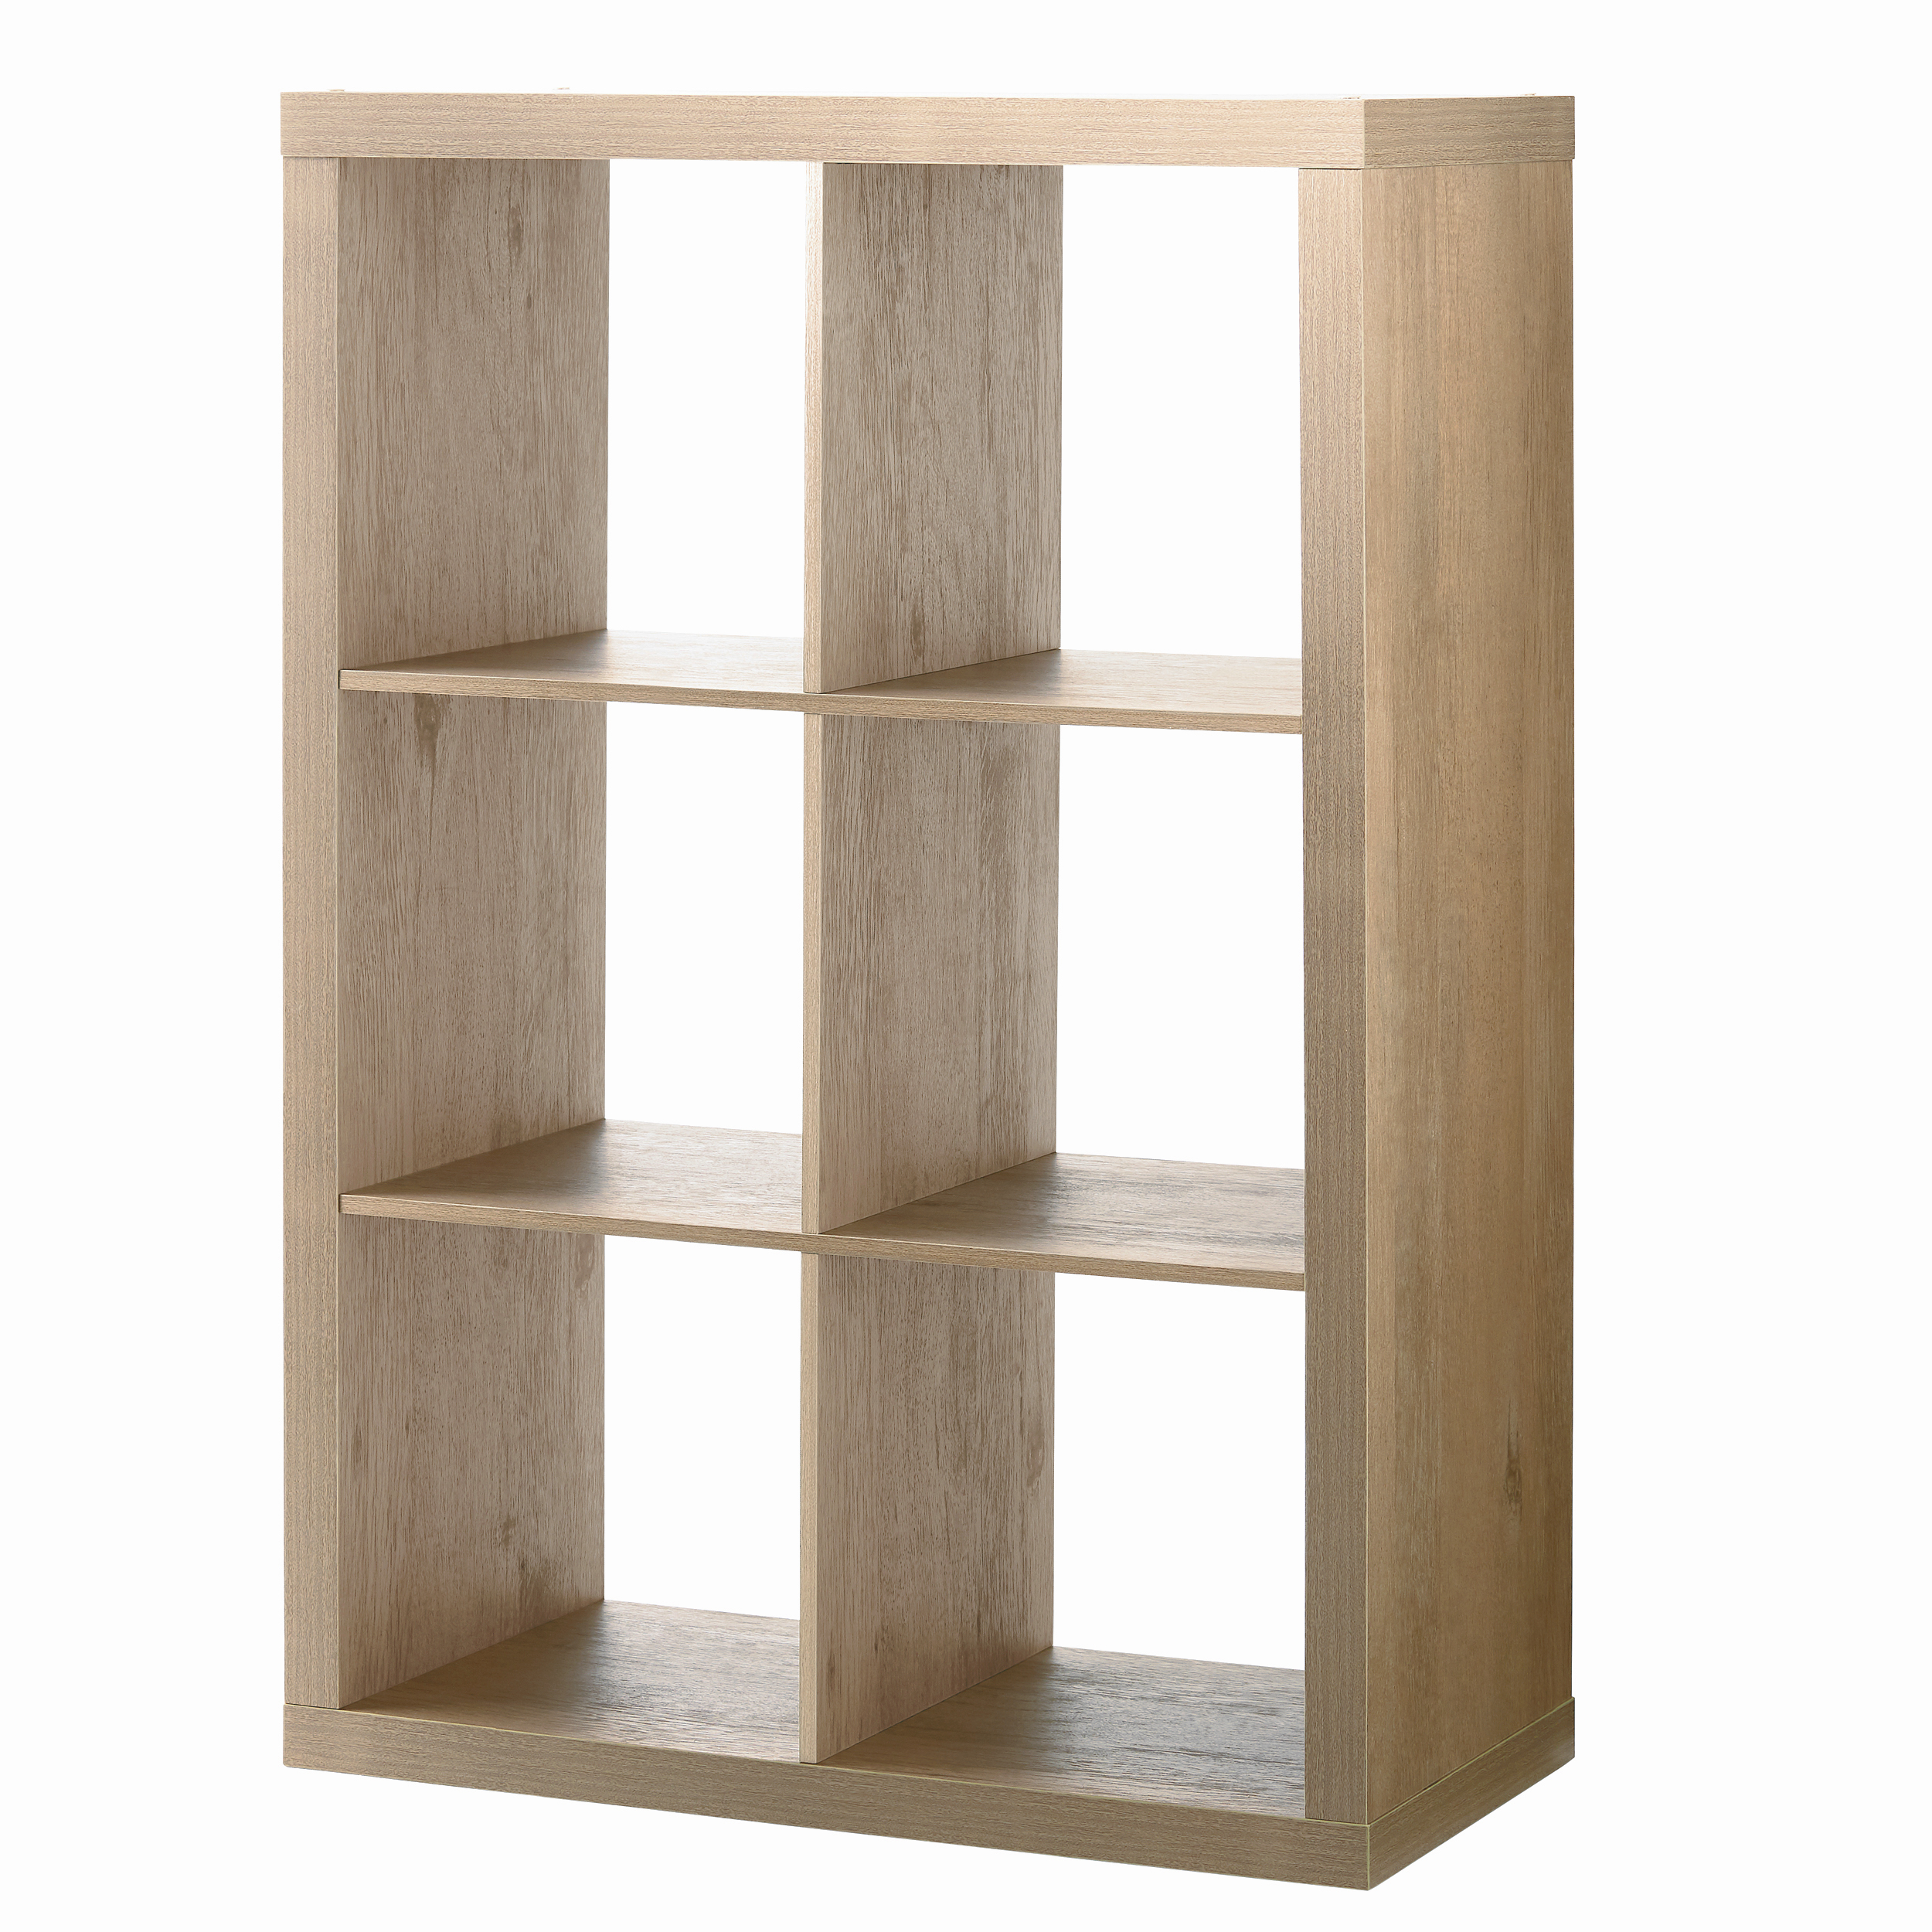 Better Homes & Gardens 6-Cube Storage Organizer, Natural - image 1 of 7